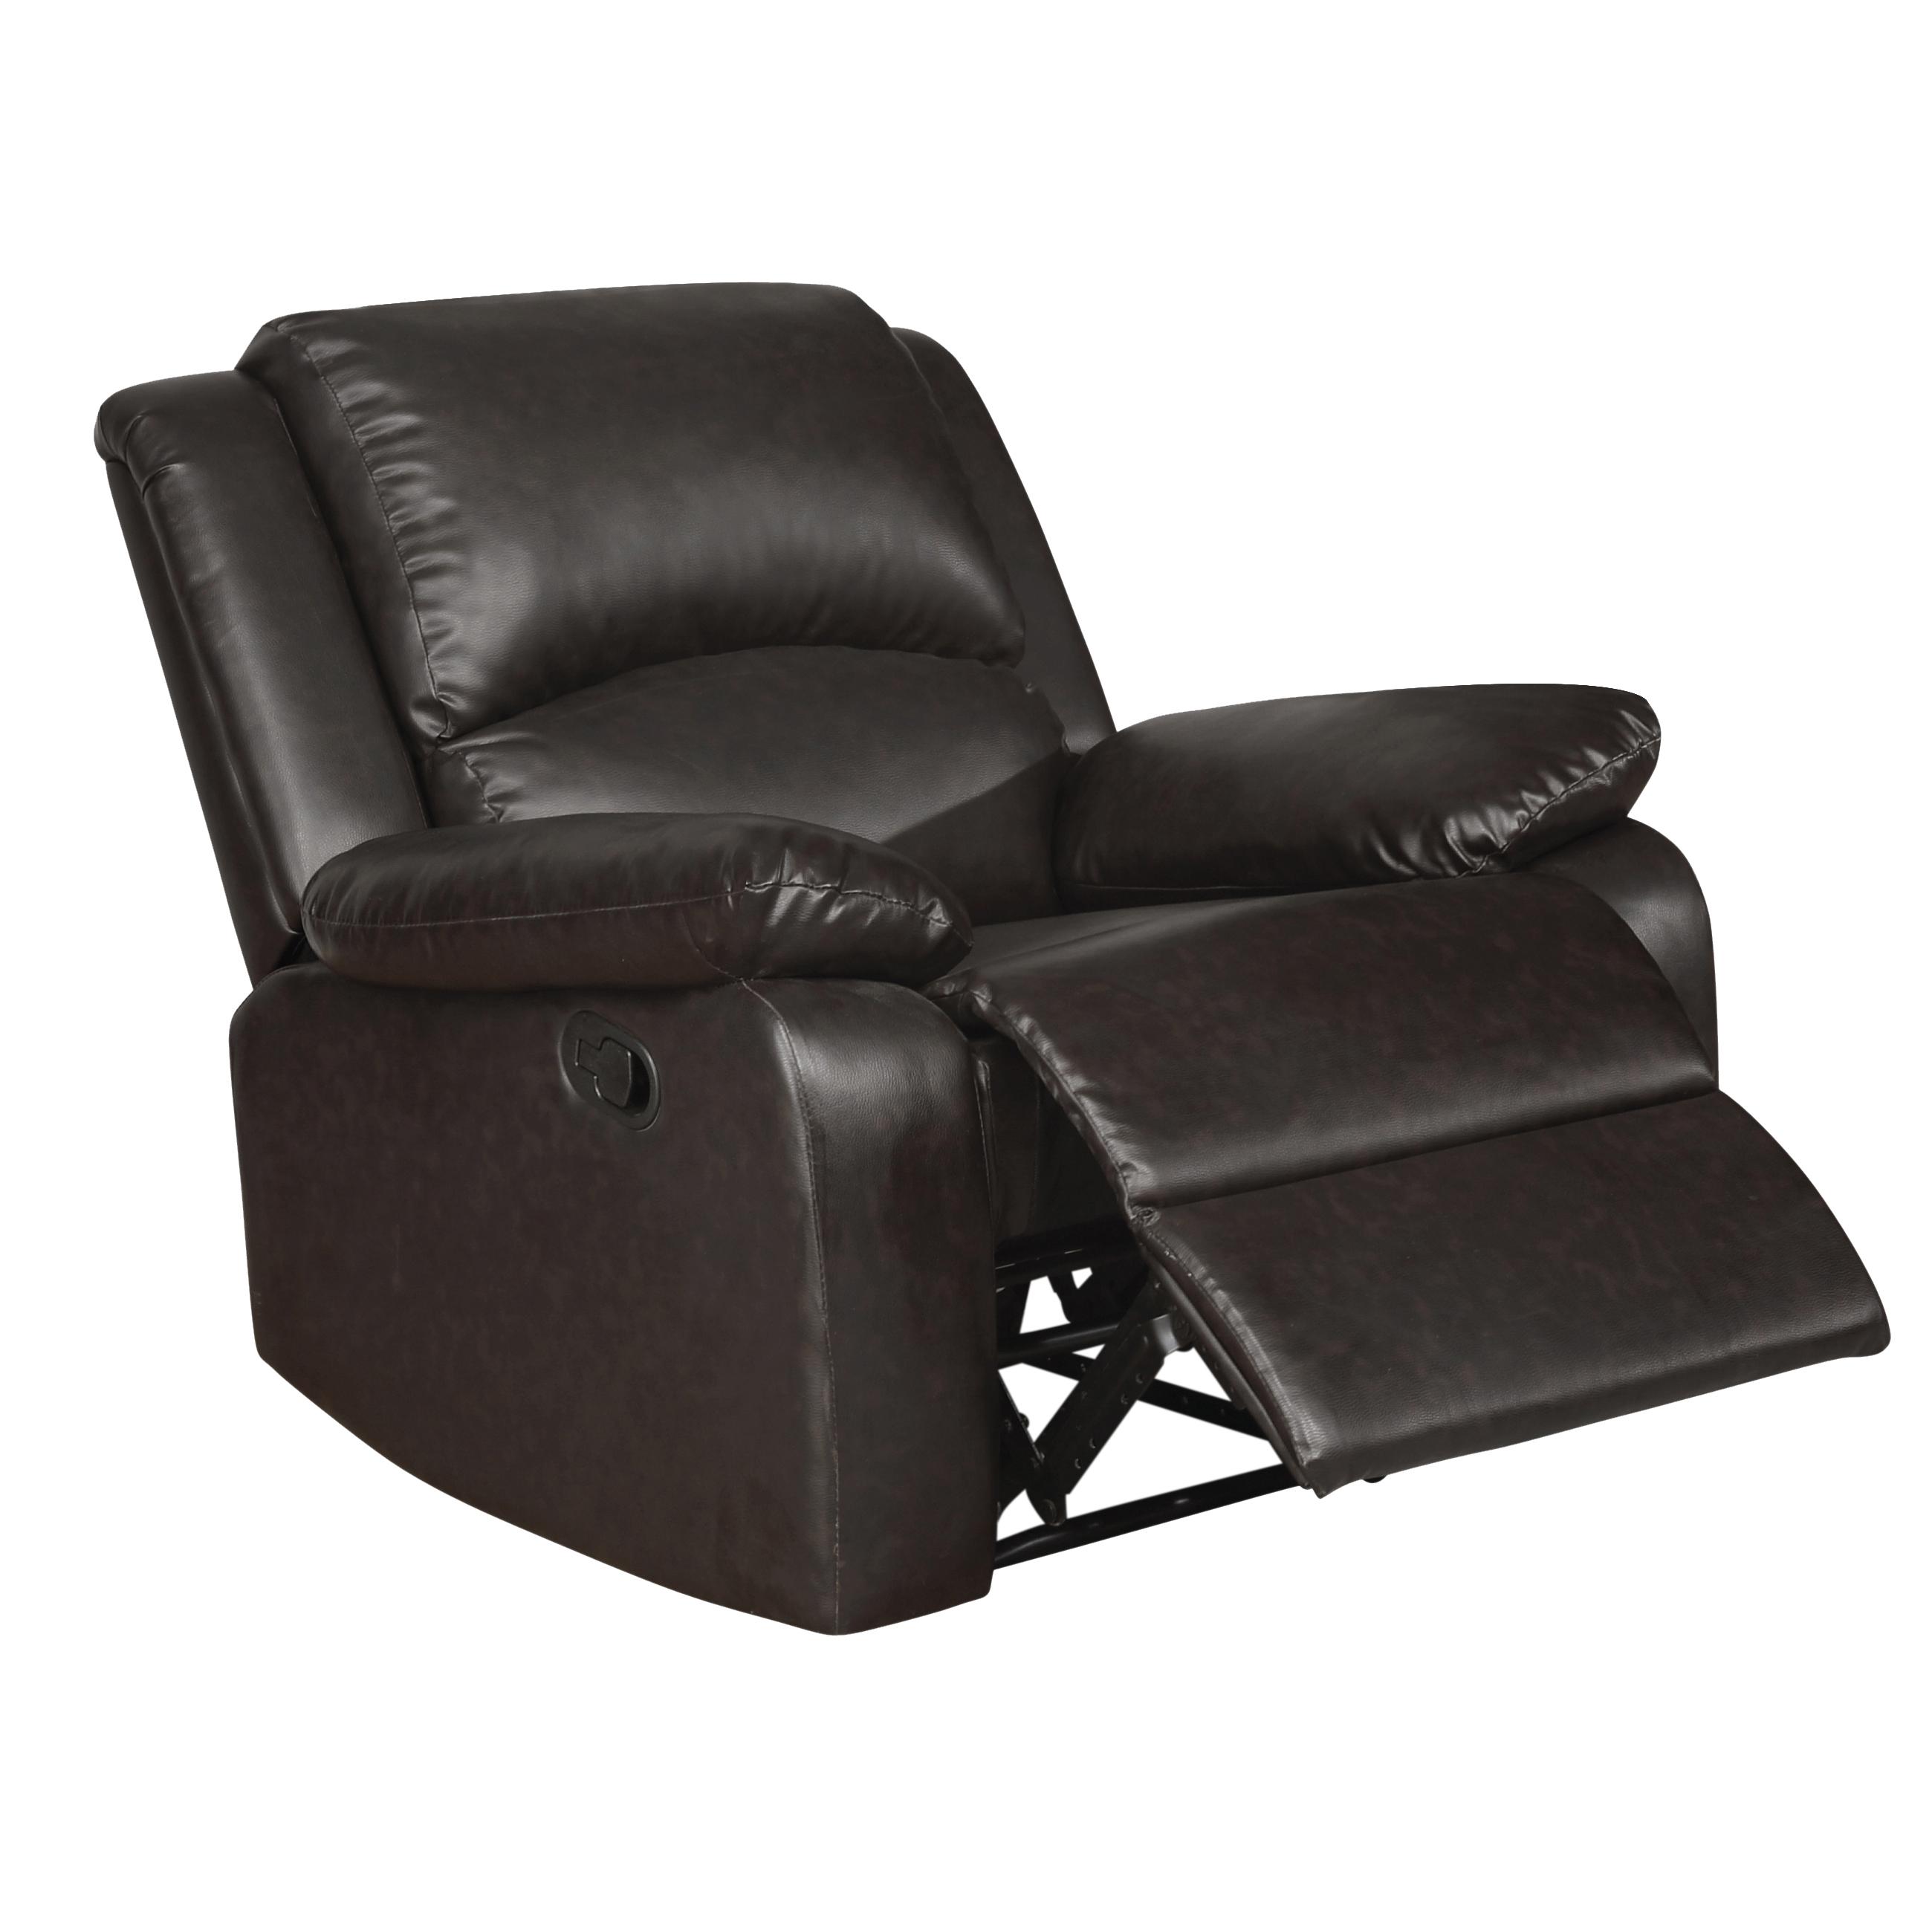 

    
Transitional Two-tone Brown Leatherette Recliner Coaster 600973 Boston
